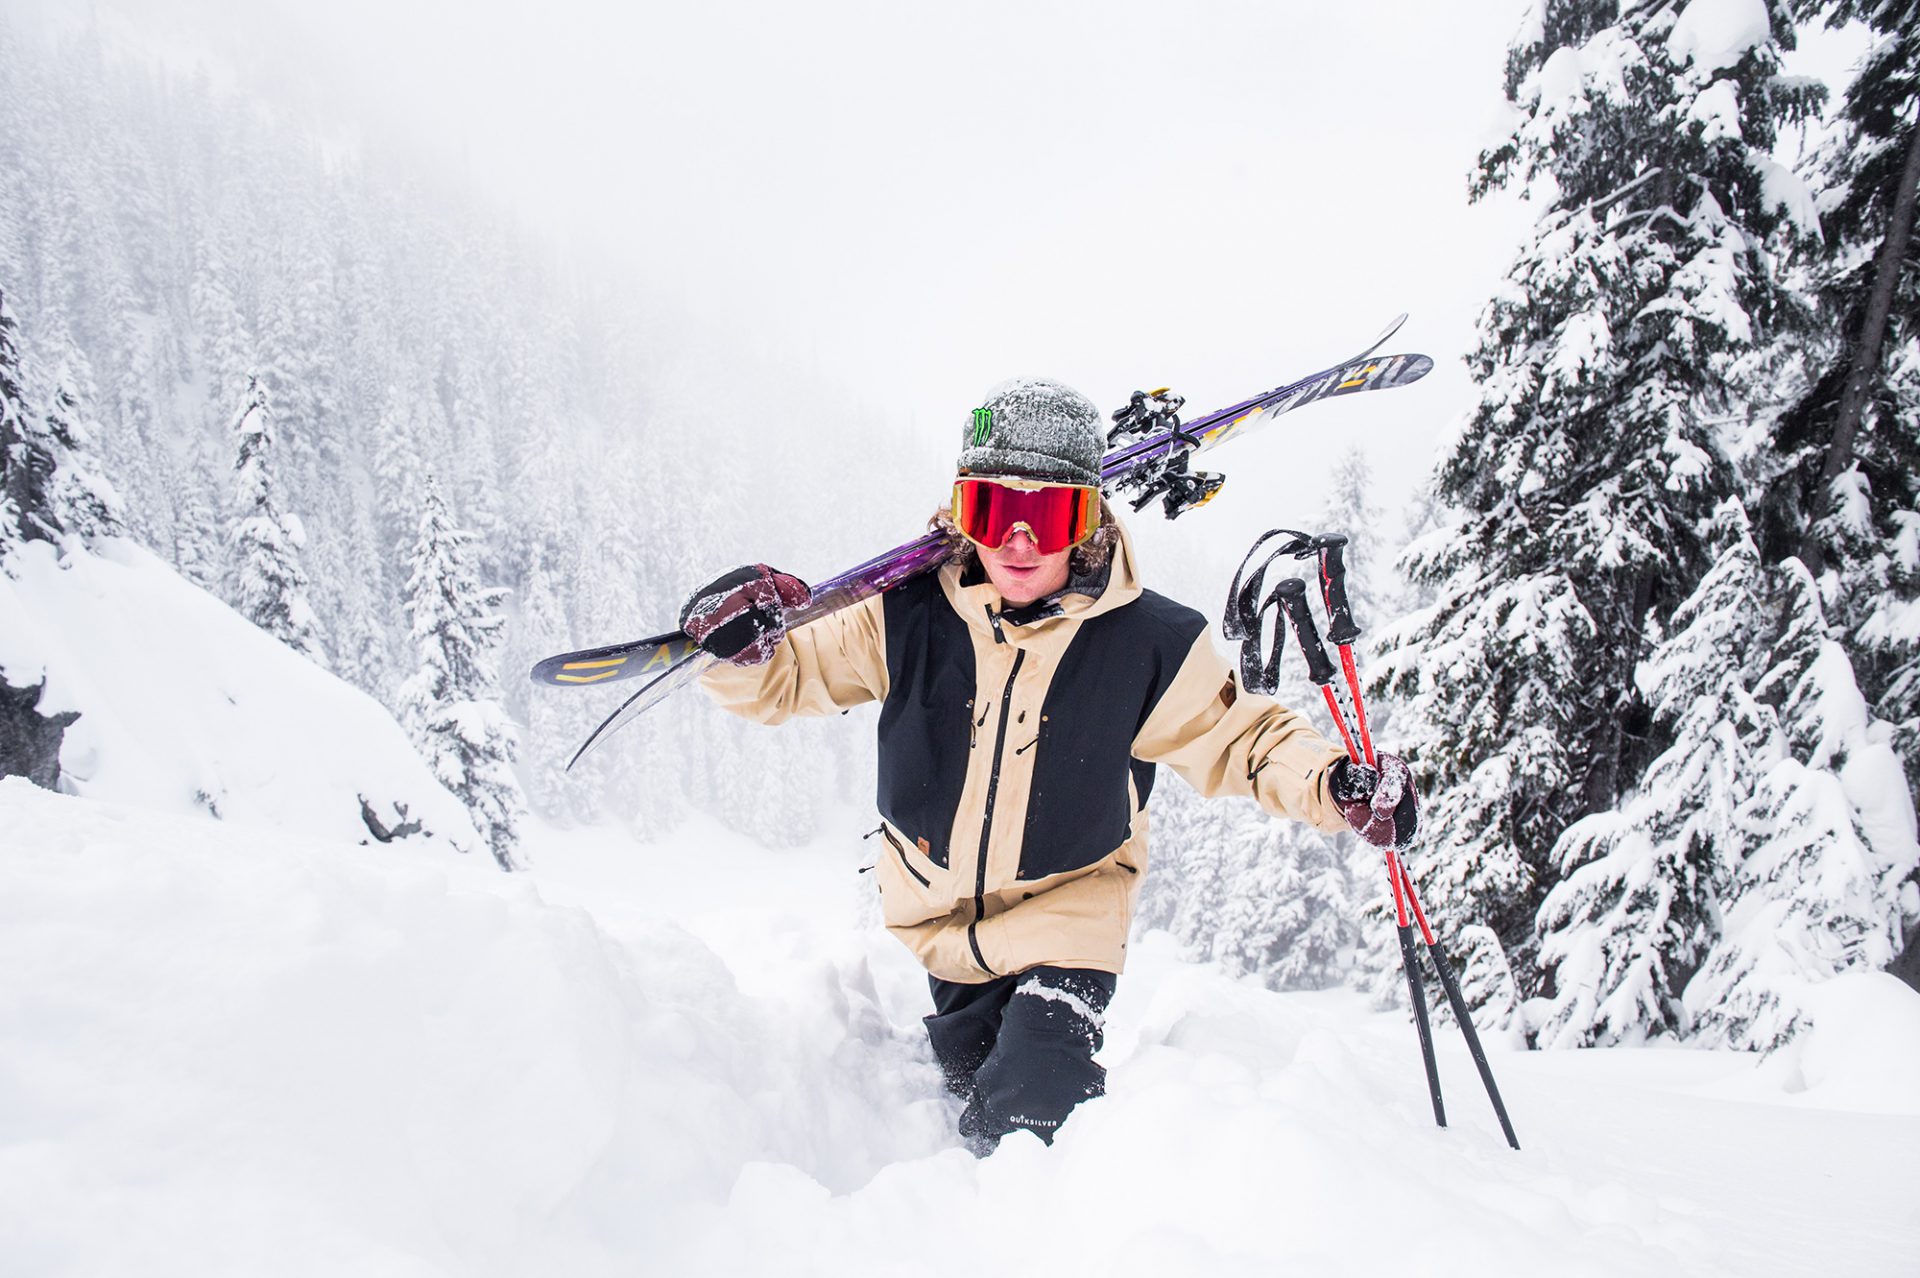 Quiksilver welcomes Sammy Carlson to their roster